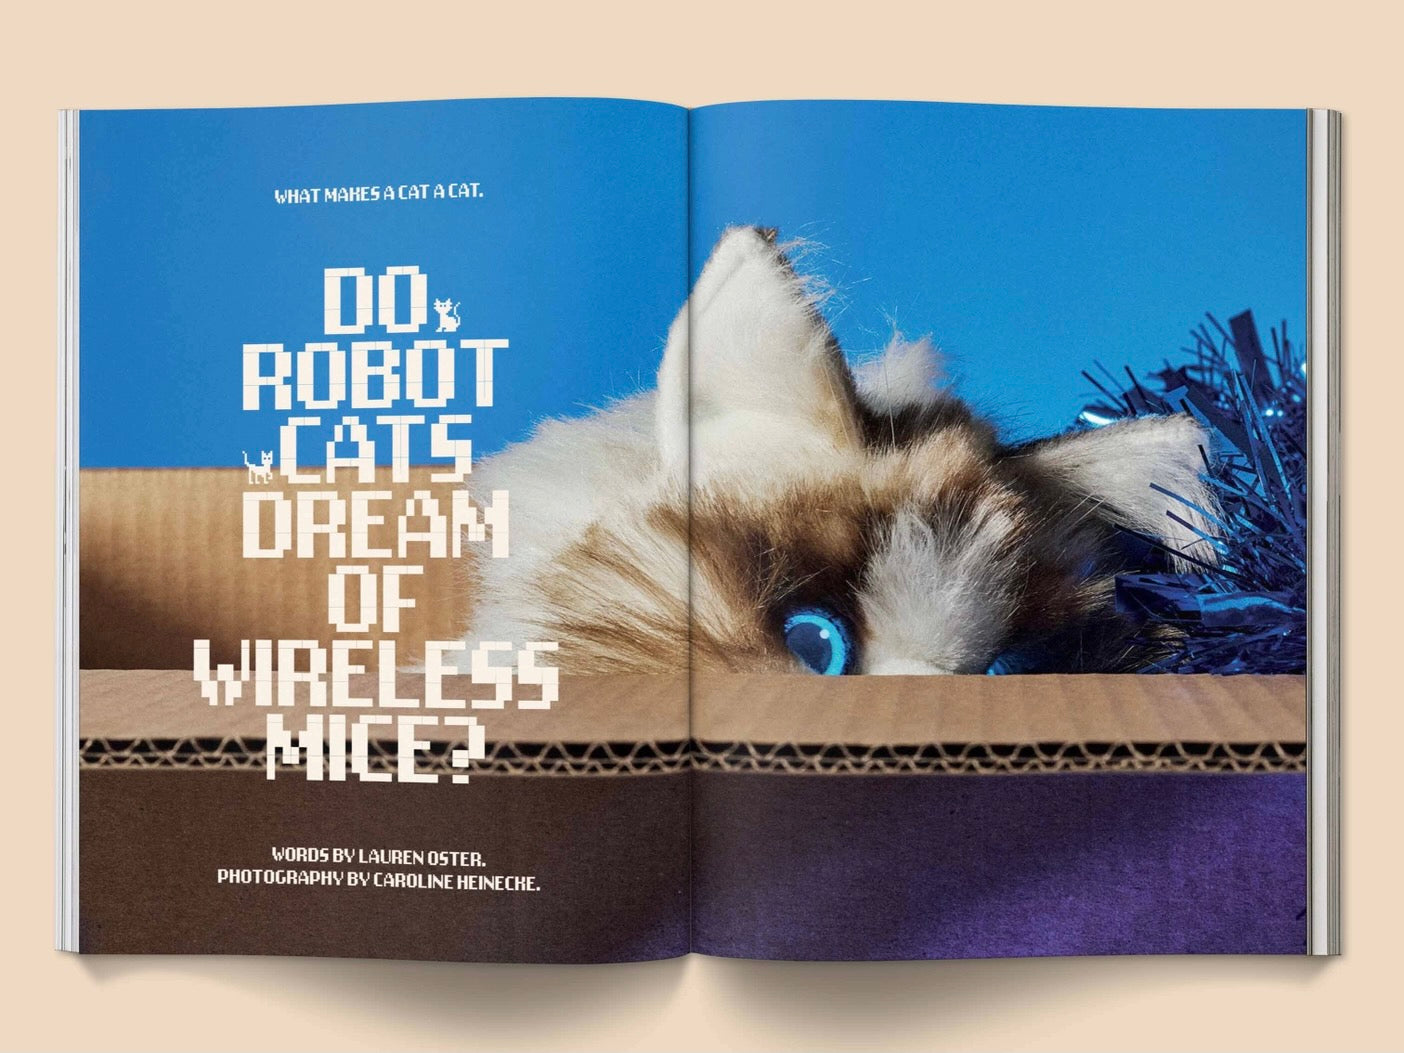 CATNIP: A MAGAZINE FOR CAT PEOPLE